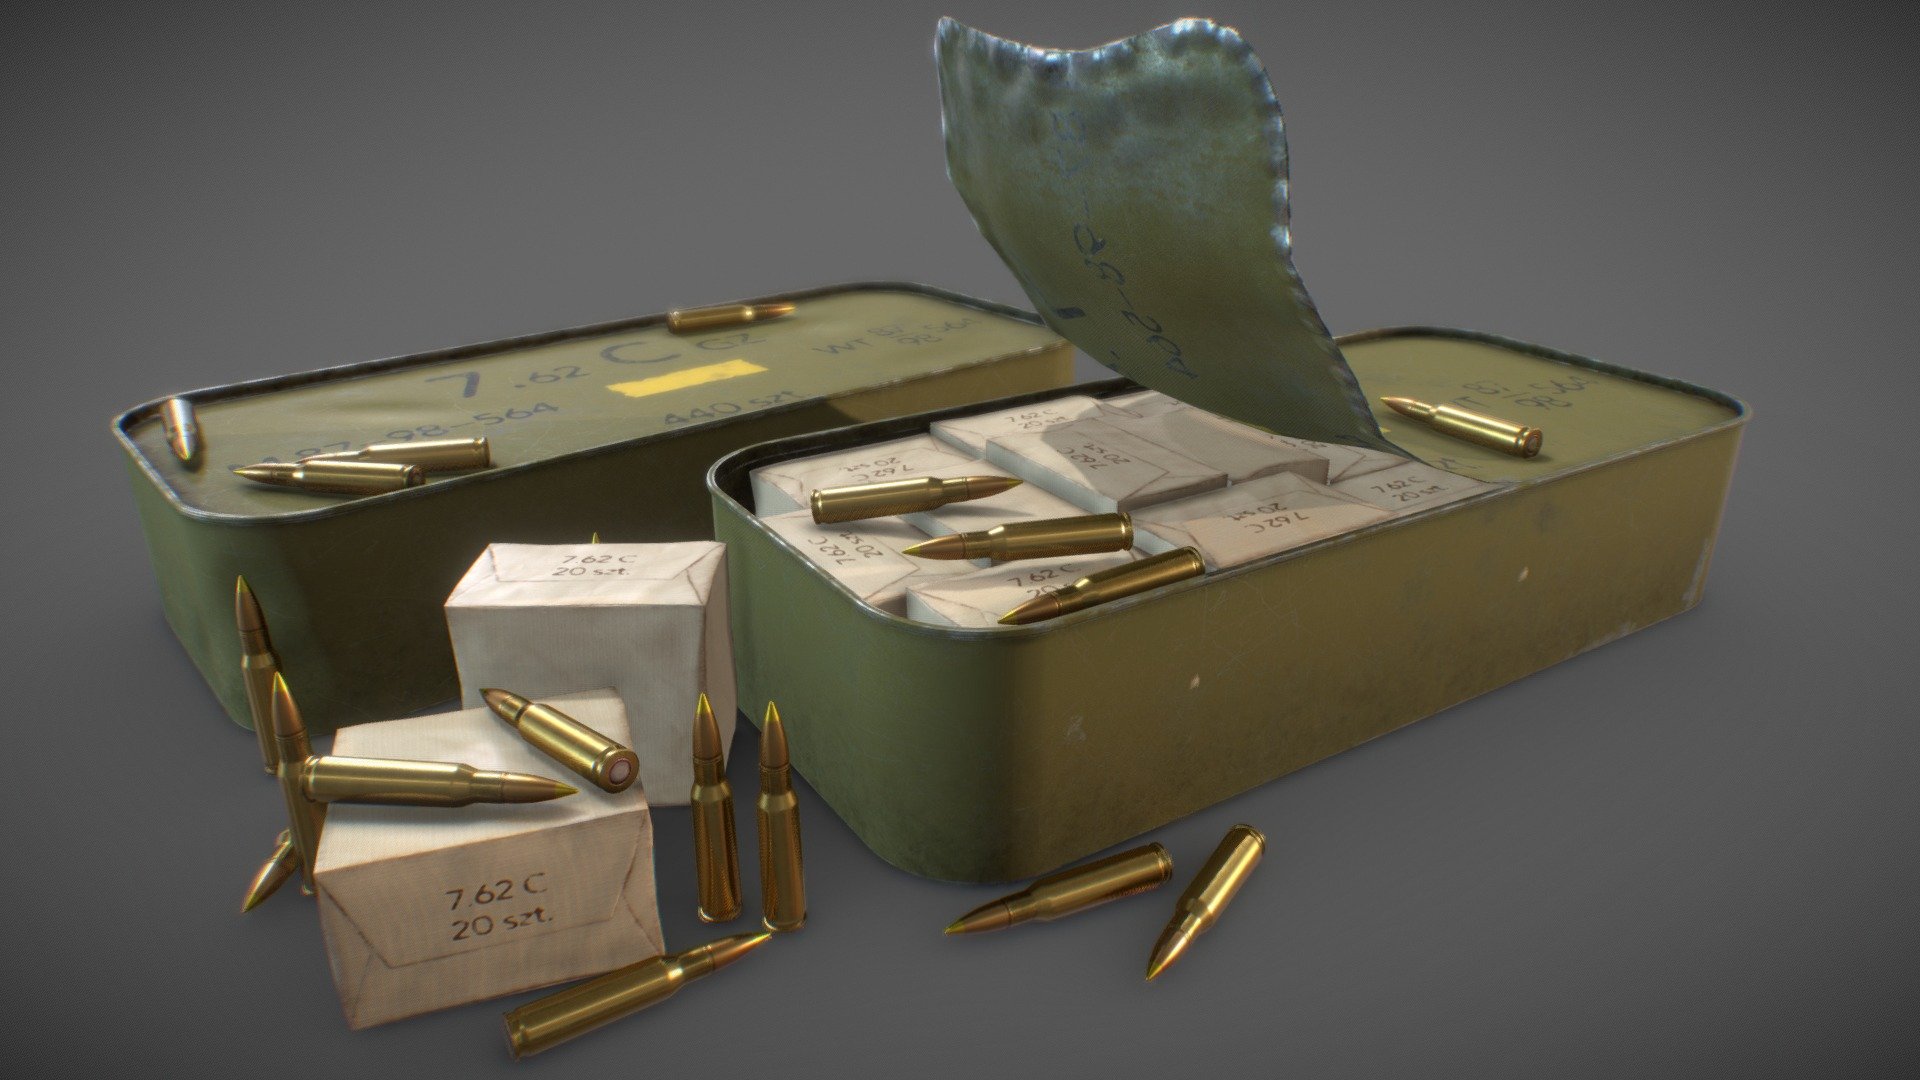 Game Art Asset. Ammunition can containing 7.62x54 rifle rounds ( heavy) with Polish markings
Pack includes 2k textures - Game Art: Rifle Ammunition Can 7.62x54 - Buy Royalty Free 3D model by MarcinGArt (@marcin.gk) 3d model